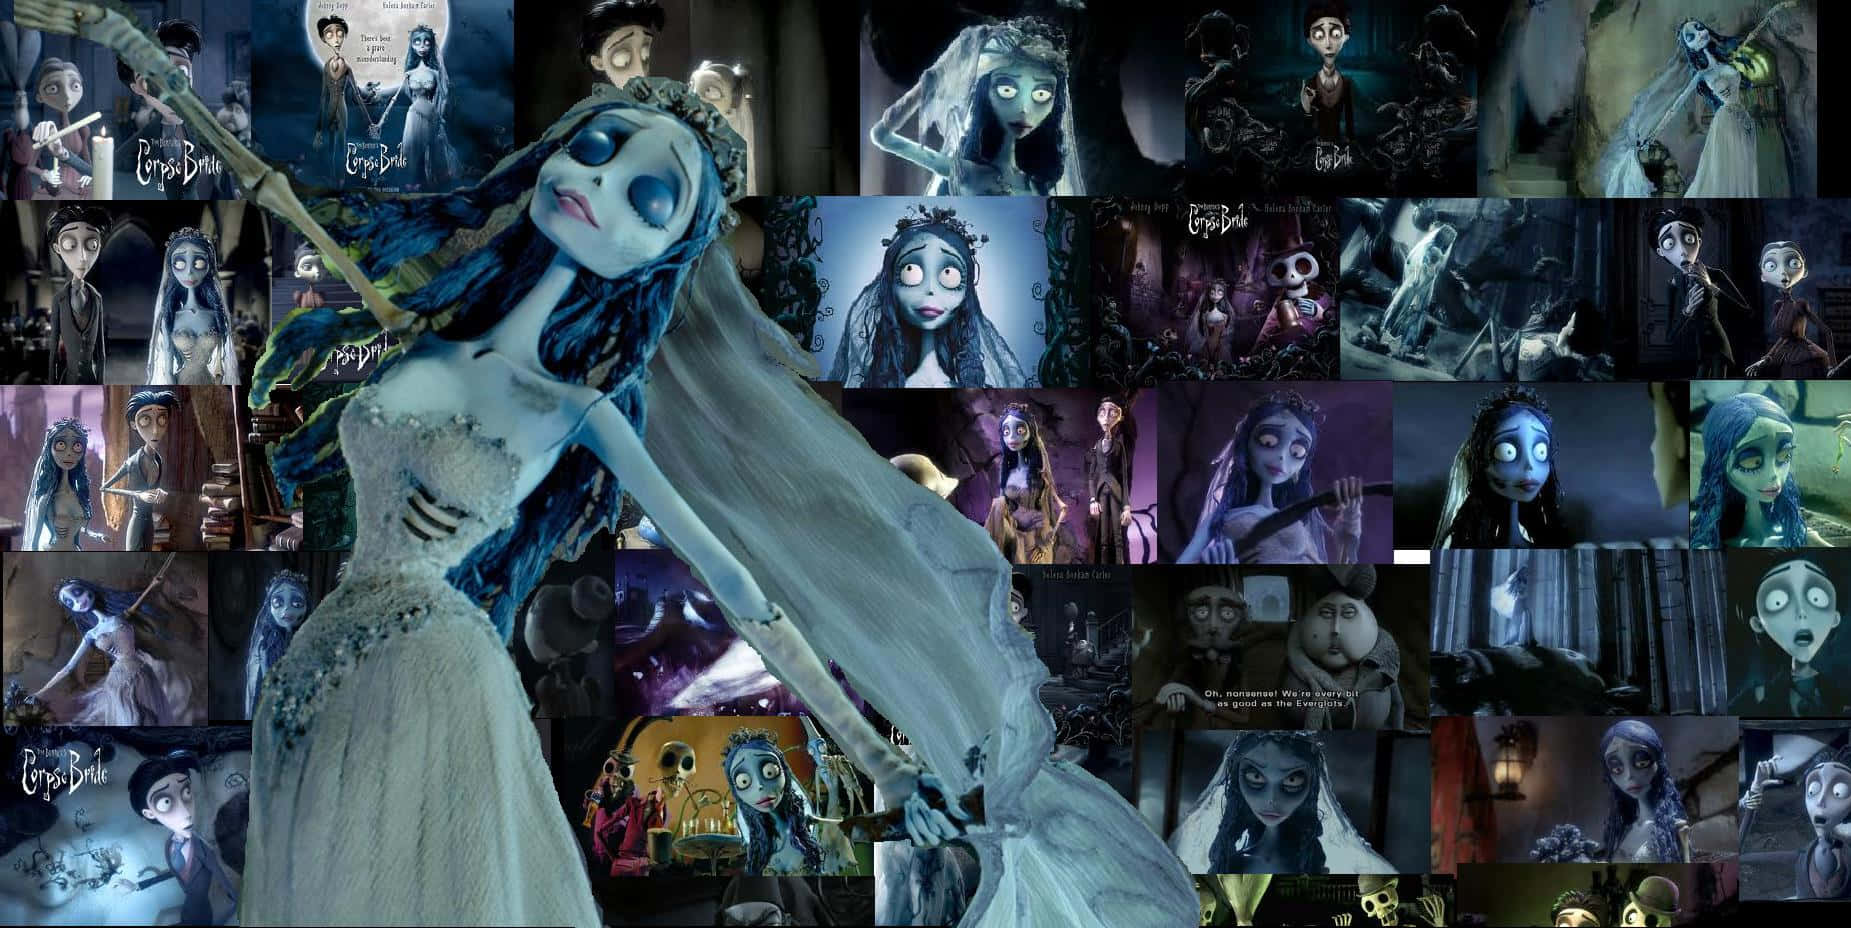 Enchanting Corpse Bride and Her Beloved in a Moonlit Forest